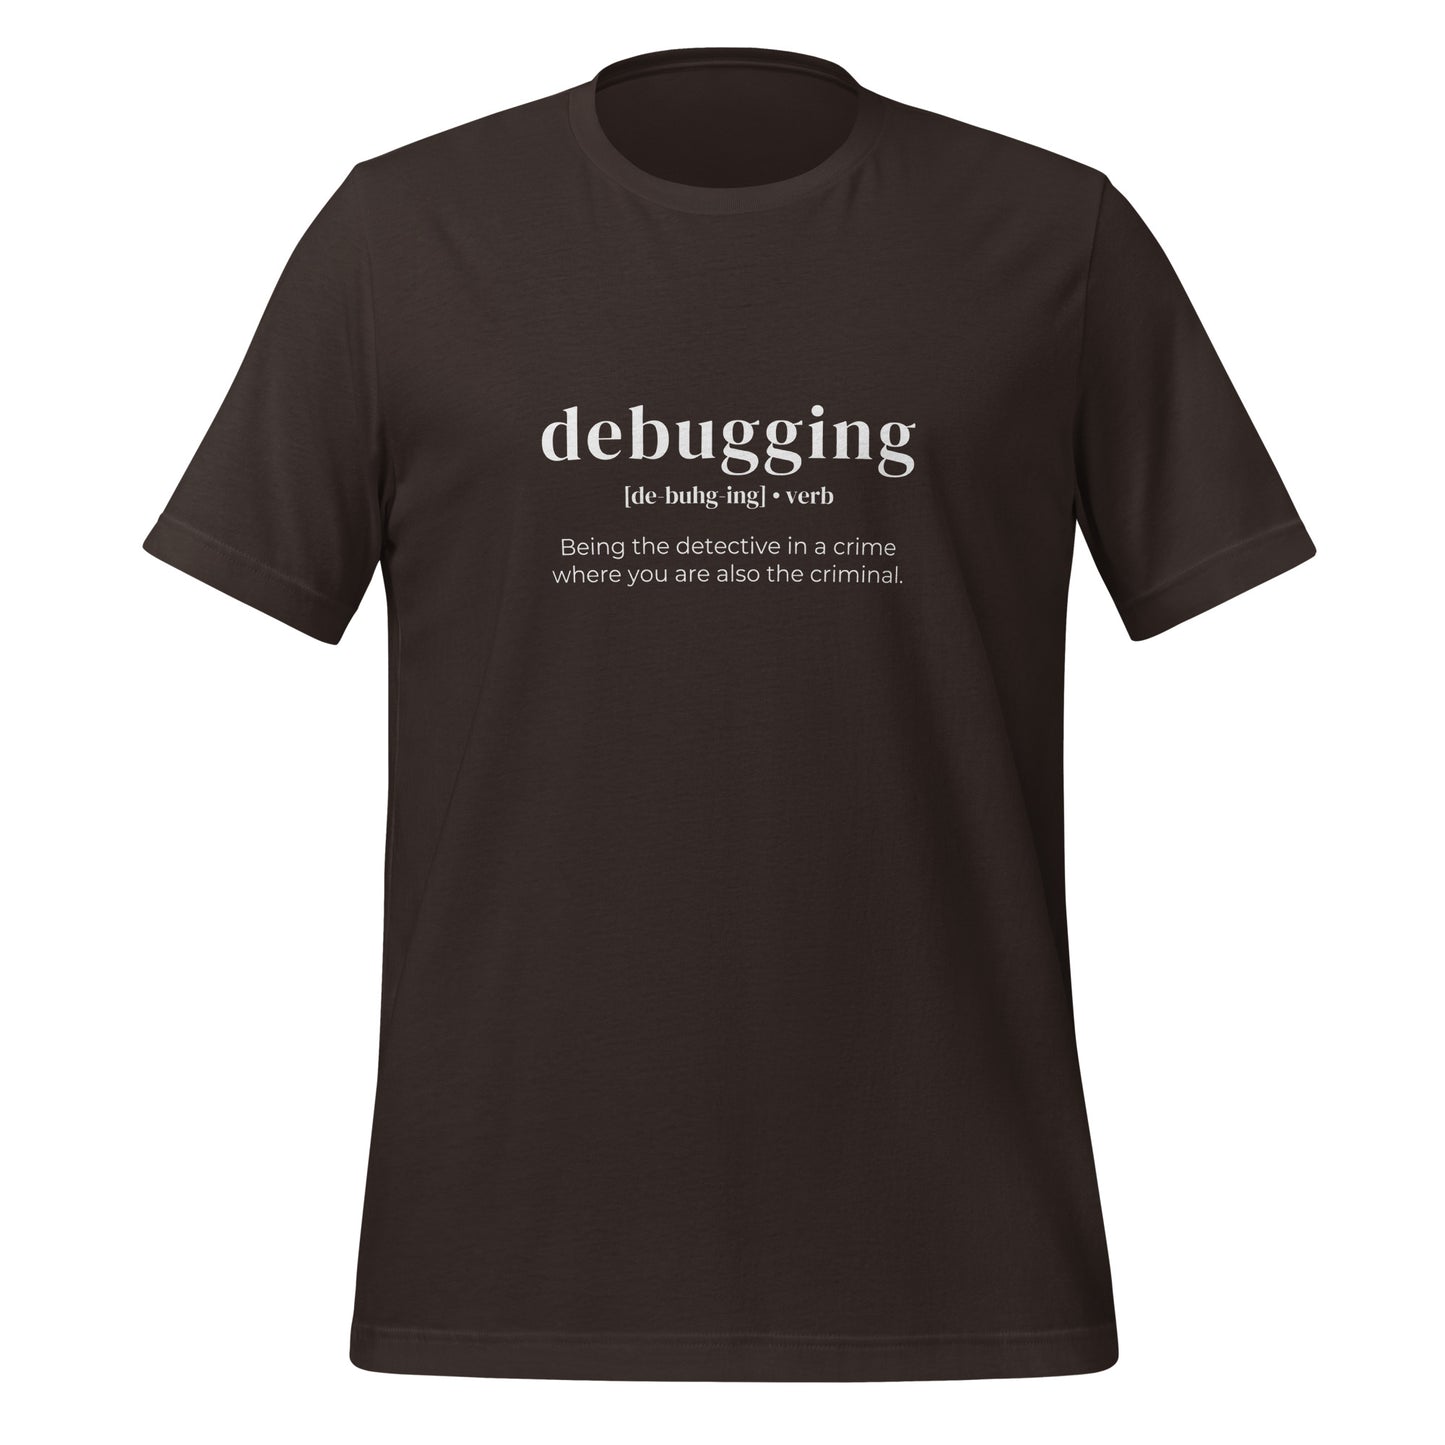 Funny Definition of Debugging T - Shirt (unisex) - Brown - AI Store